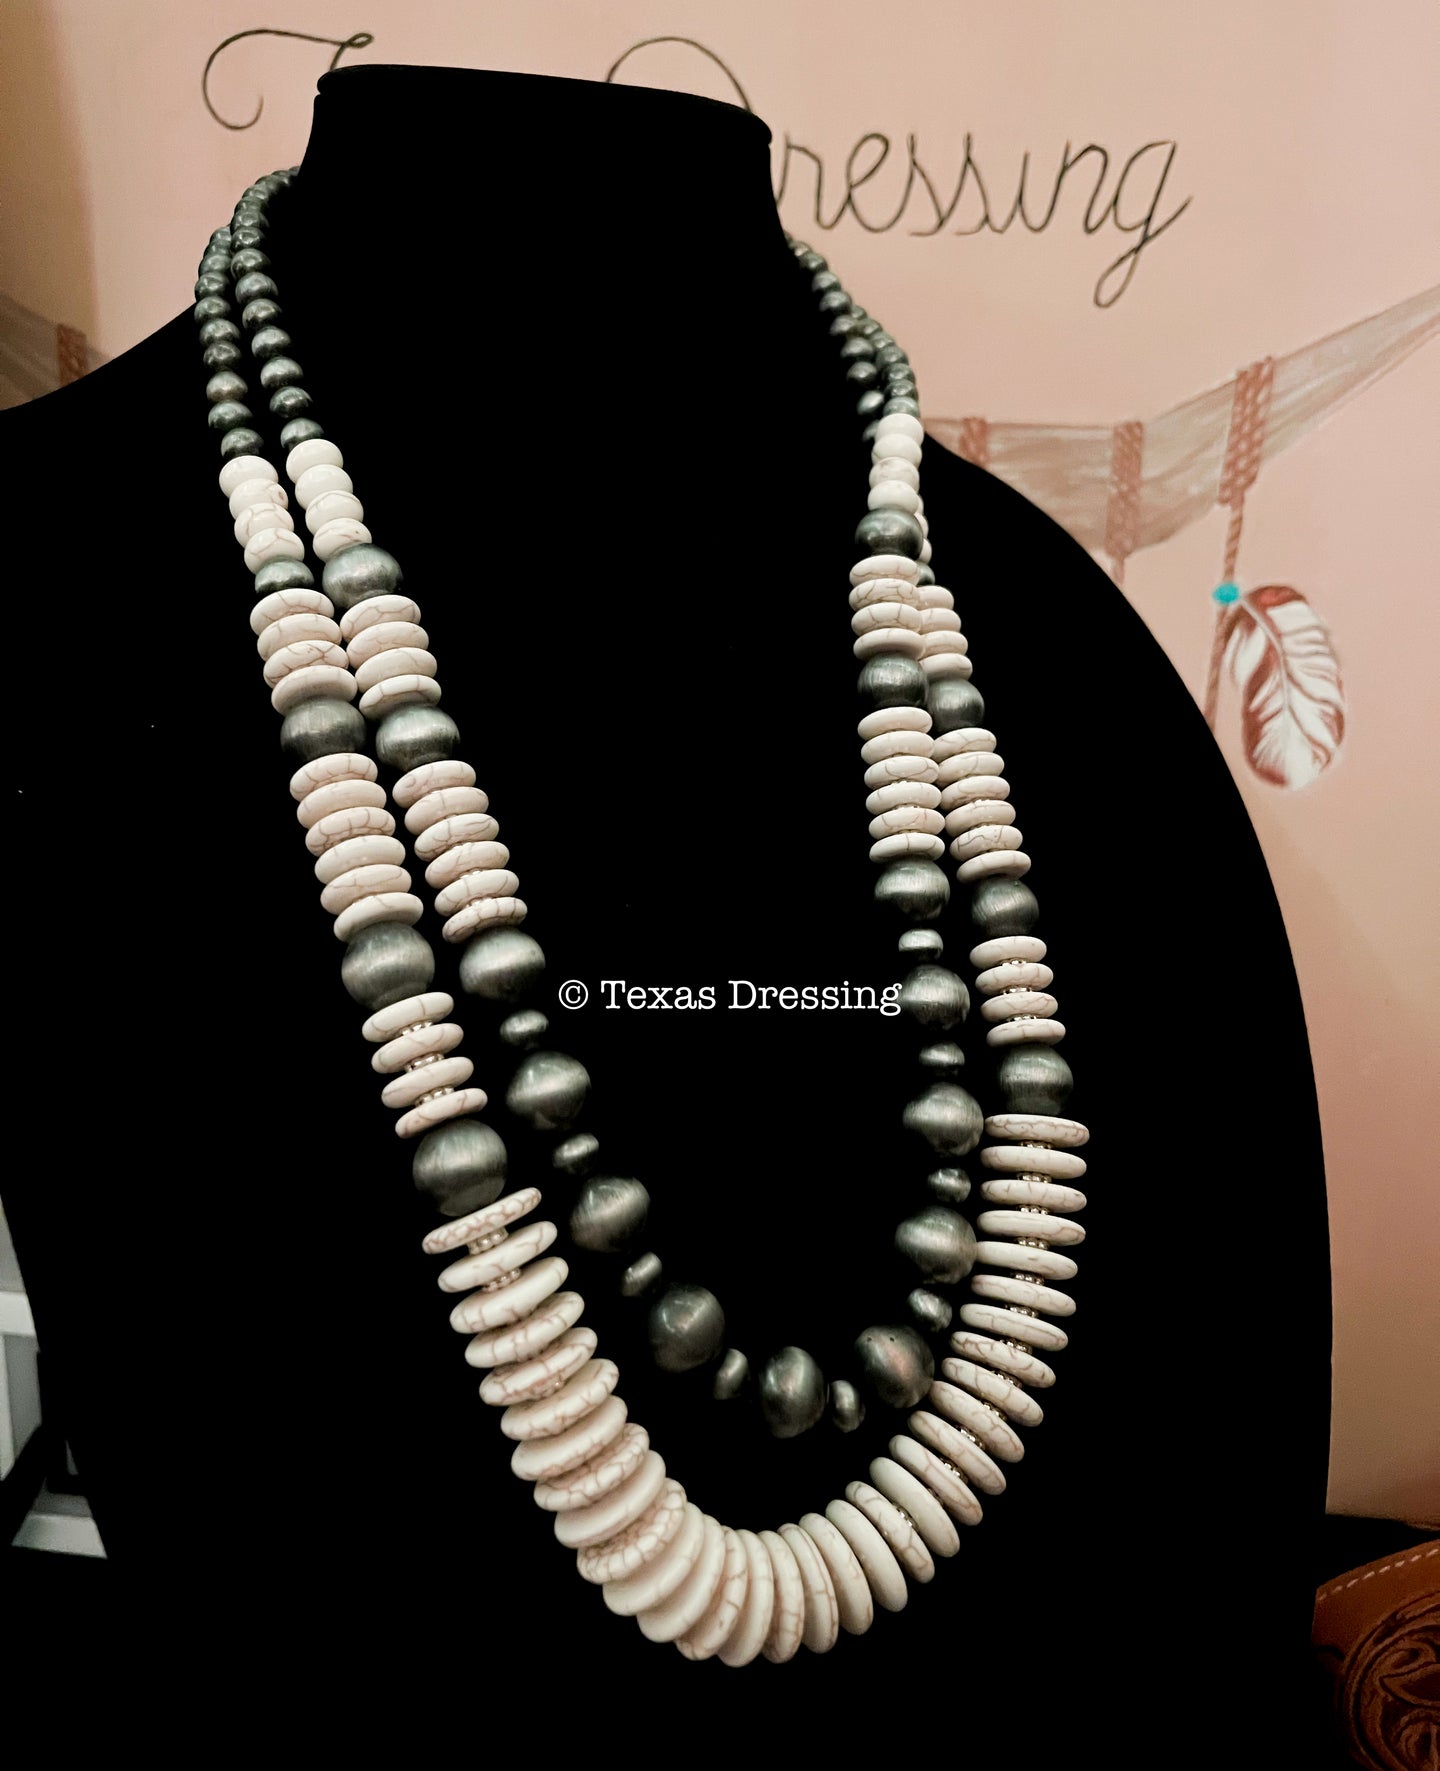 Desert Chic - 2 Layer Necklace